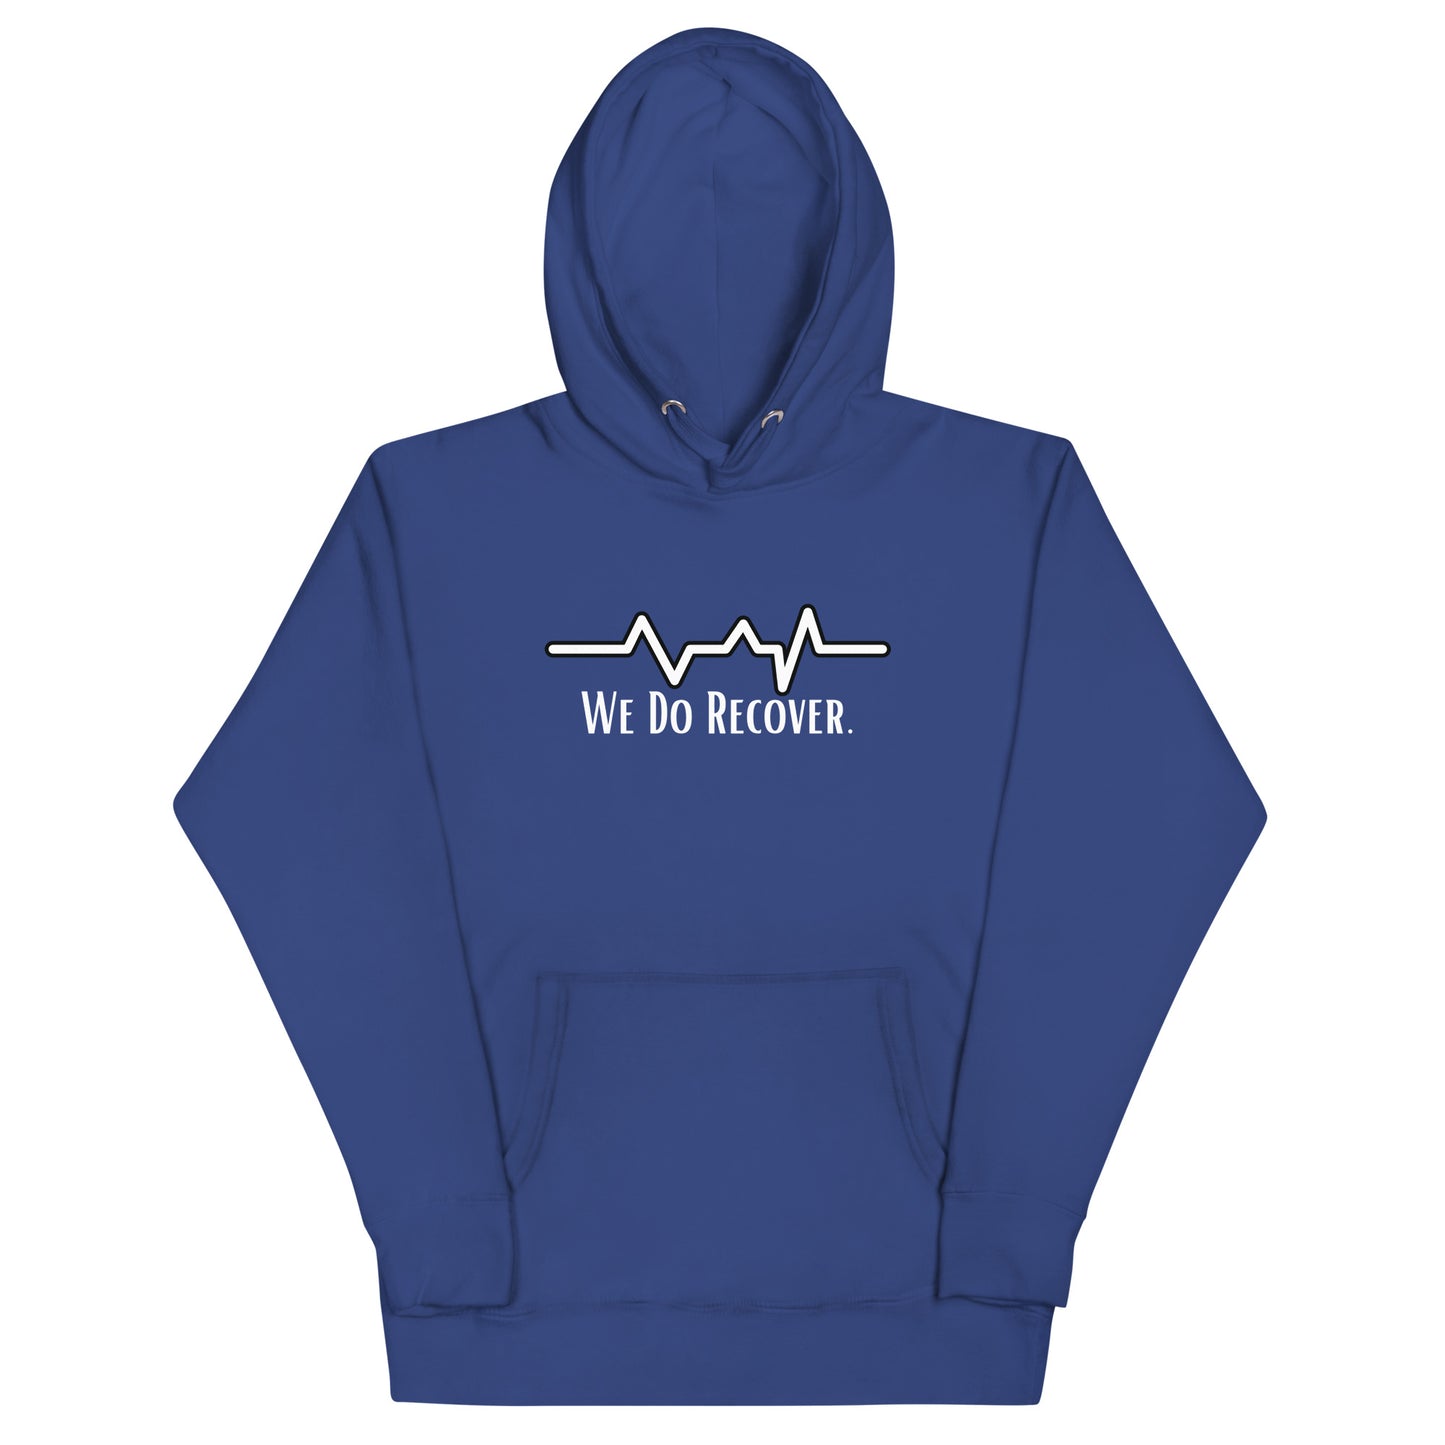 We Do Recover hoodie